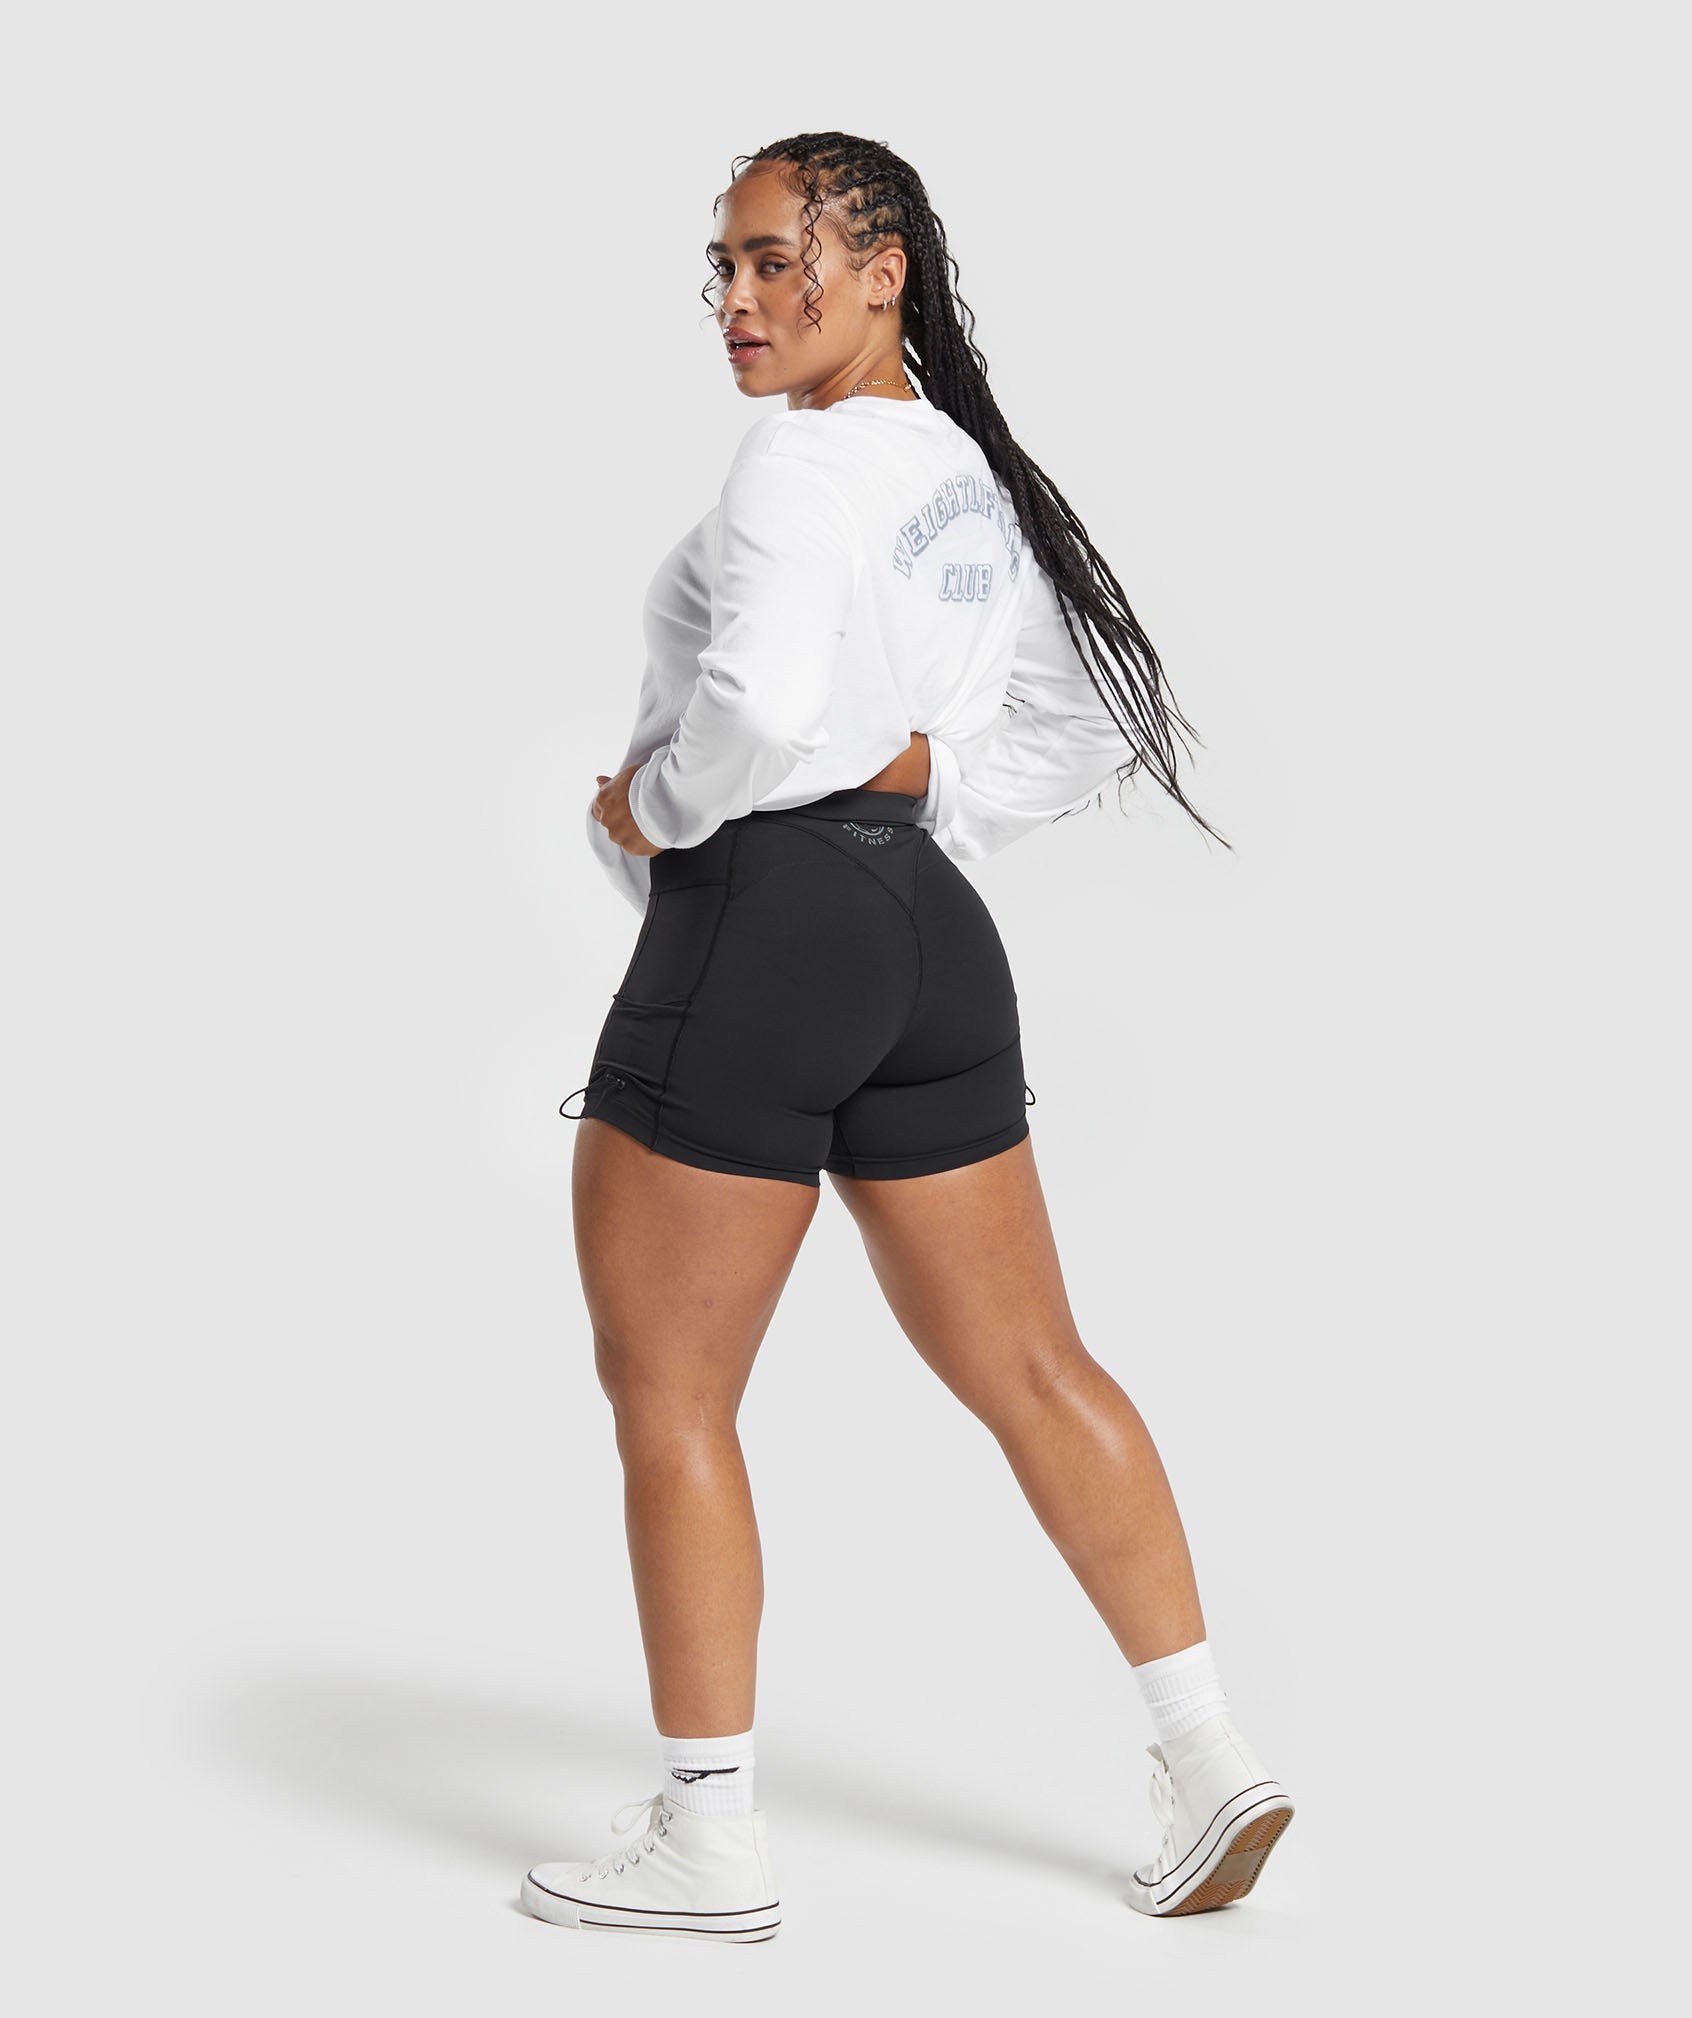 Weightlifting Long Sleeve Top in White - view 4